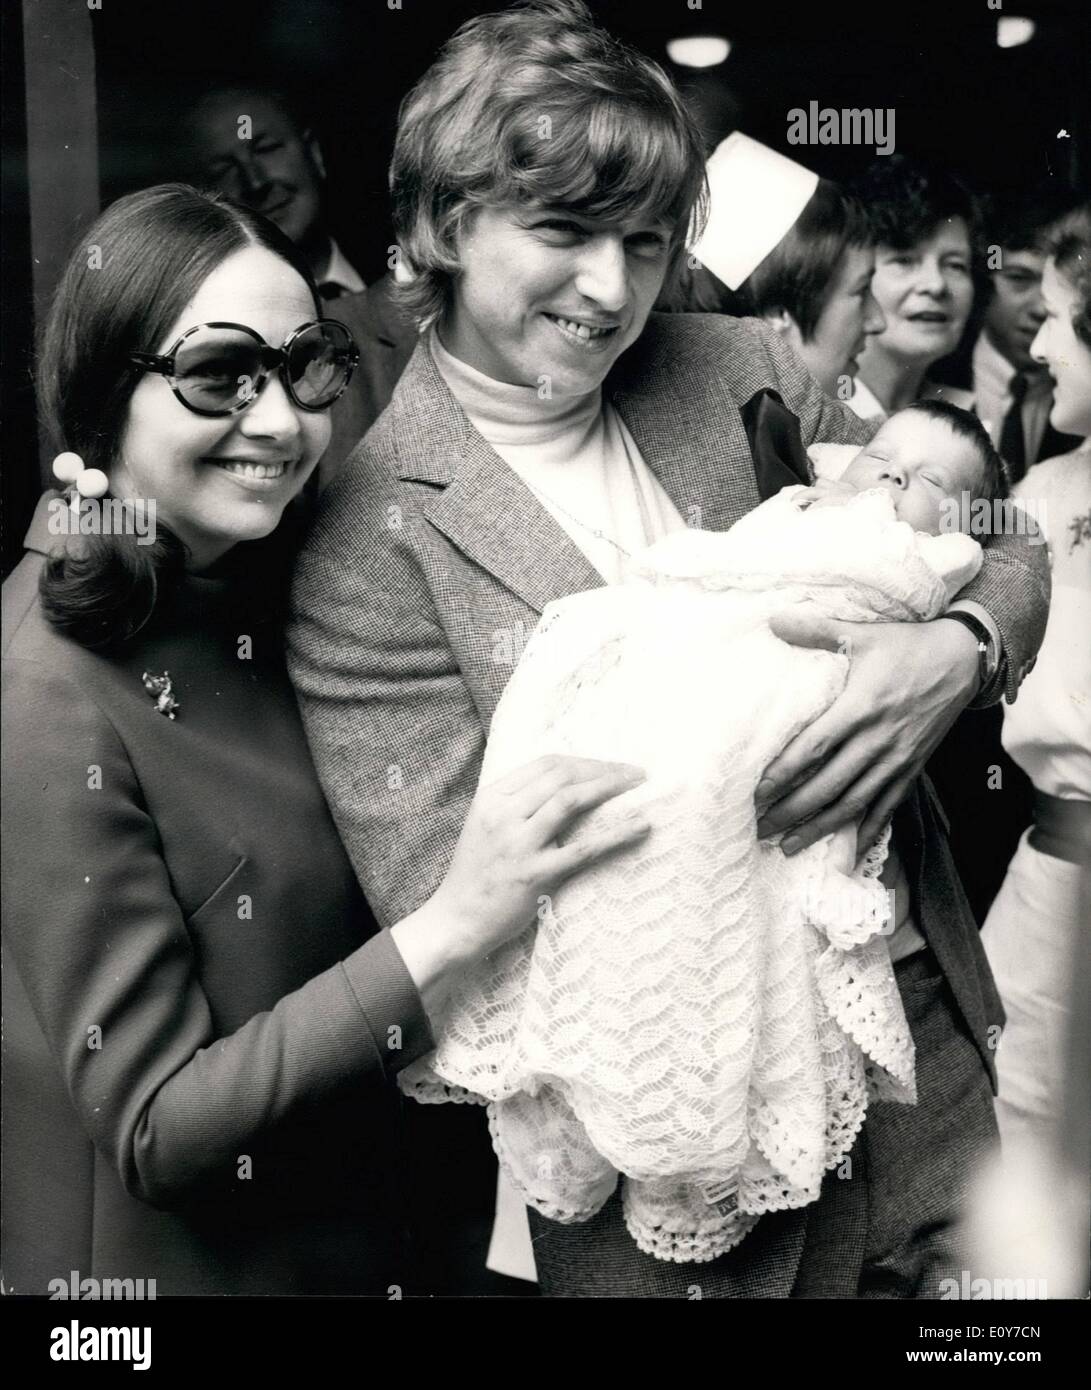 Apr. 04, 1969 - TOMMY STEELE'S WIFE AND BABY LEAVE HOSPITAL. Tommy Steele drove his wife Ann and their baby daughter Emma Elizabeth home from the Middlesex Hospital today. Emma was born at the hospital on March 27th. Keystone Photo Shows:- Tommy Steele, pictured with his wife, Ann, and baby daughter, Emma Elizabeth, leaving the hospital today. Stock Photo